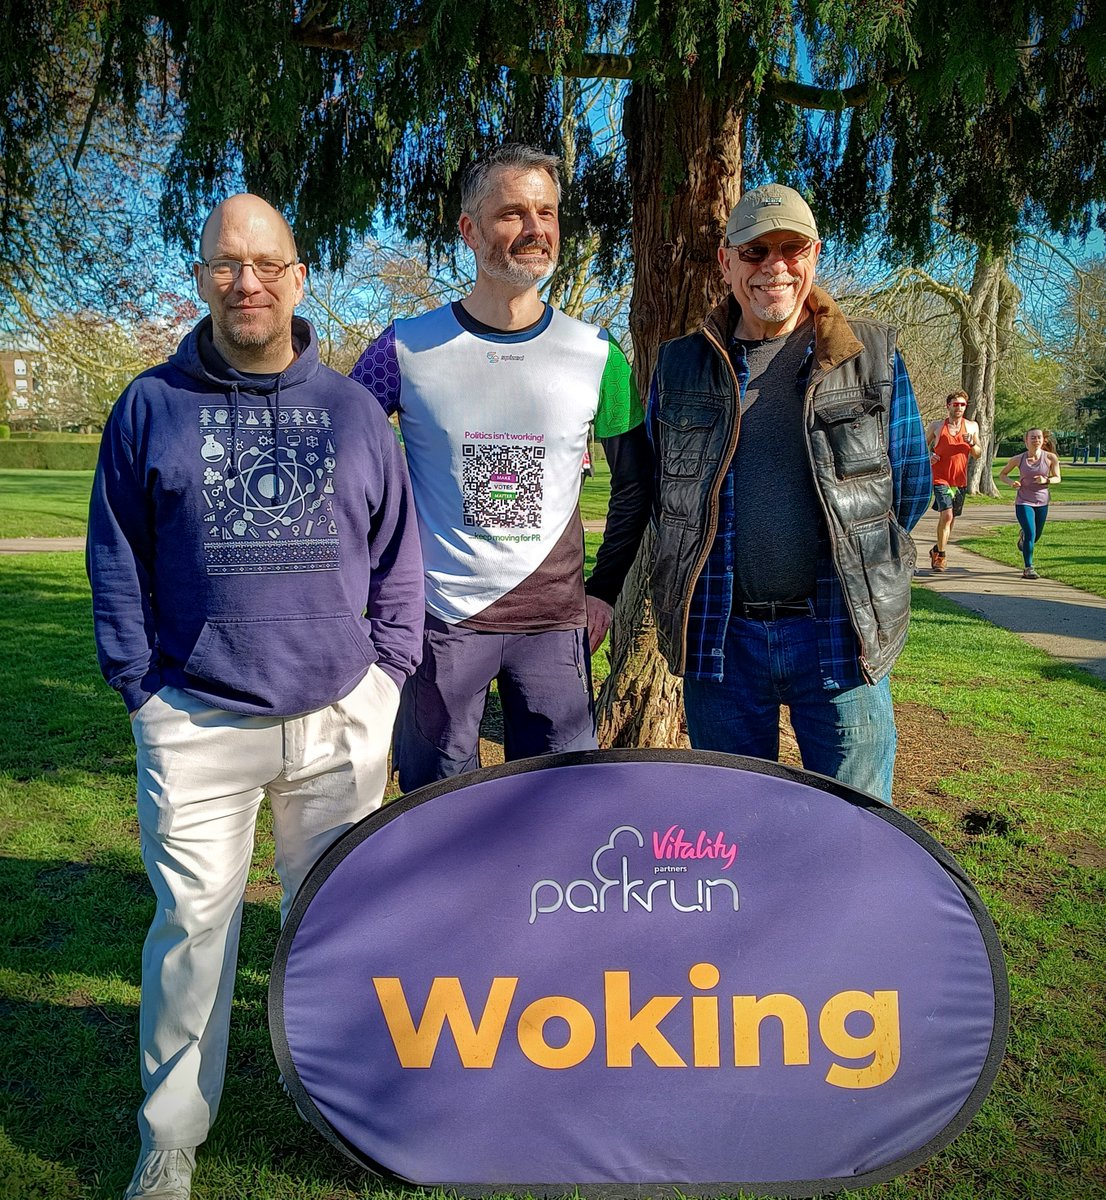 Great to see Richard and Paul at @wokingparkrun this morning in the beautiful sunshine!!
👍🙏👍🙏👍🙏👍🙏👍🙏👍🙏

Every Saturday morning - 9am - #KeepMovingForPR

#WipeOutFPTP
#PRDelivers

...running to @MakeVotesMatter EVERYWHERE!
🏃‍♂️🏃‍♂️🏃‍♂️🏃‍♂️🏃‍♂️🏃‍♂️🏃‍♂️🏃‍♂️🏃‍♂️🏃‍♂️🏃‍♂️🏃‍♂️🏃‍♂️